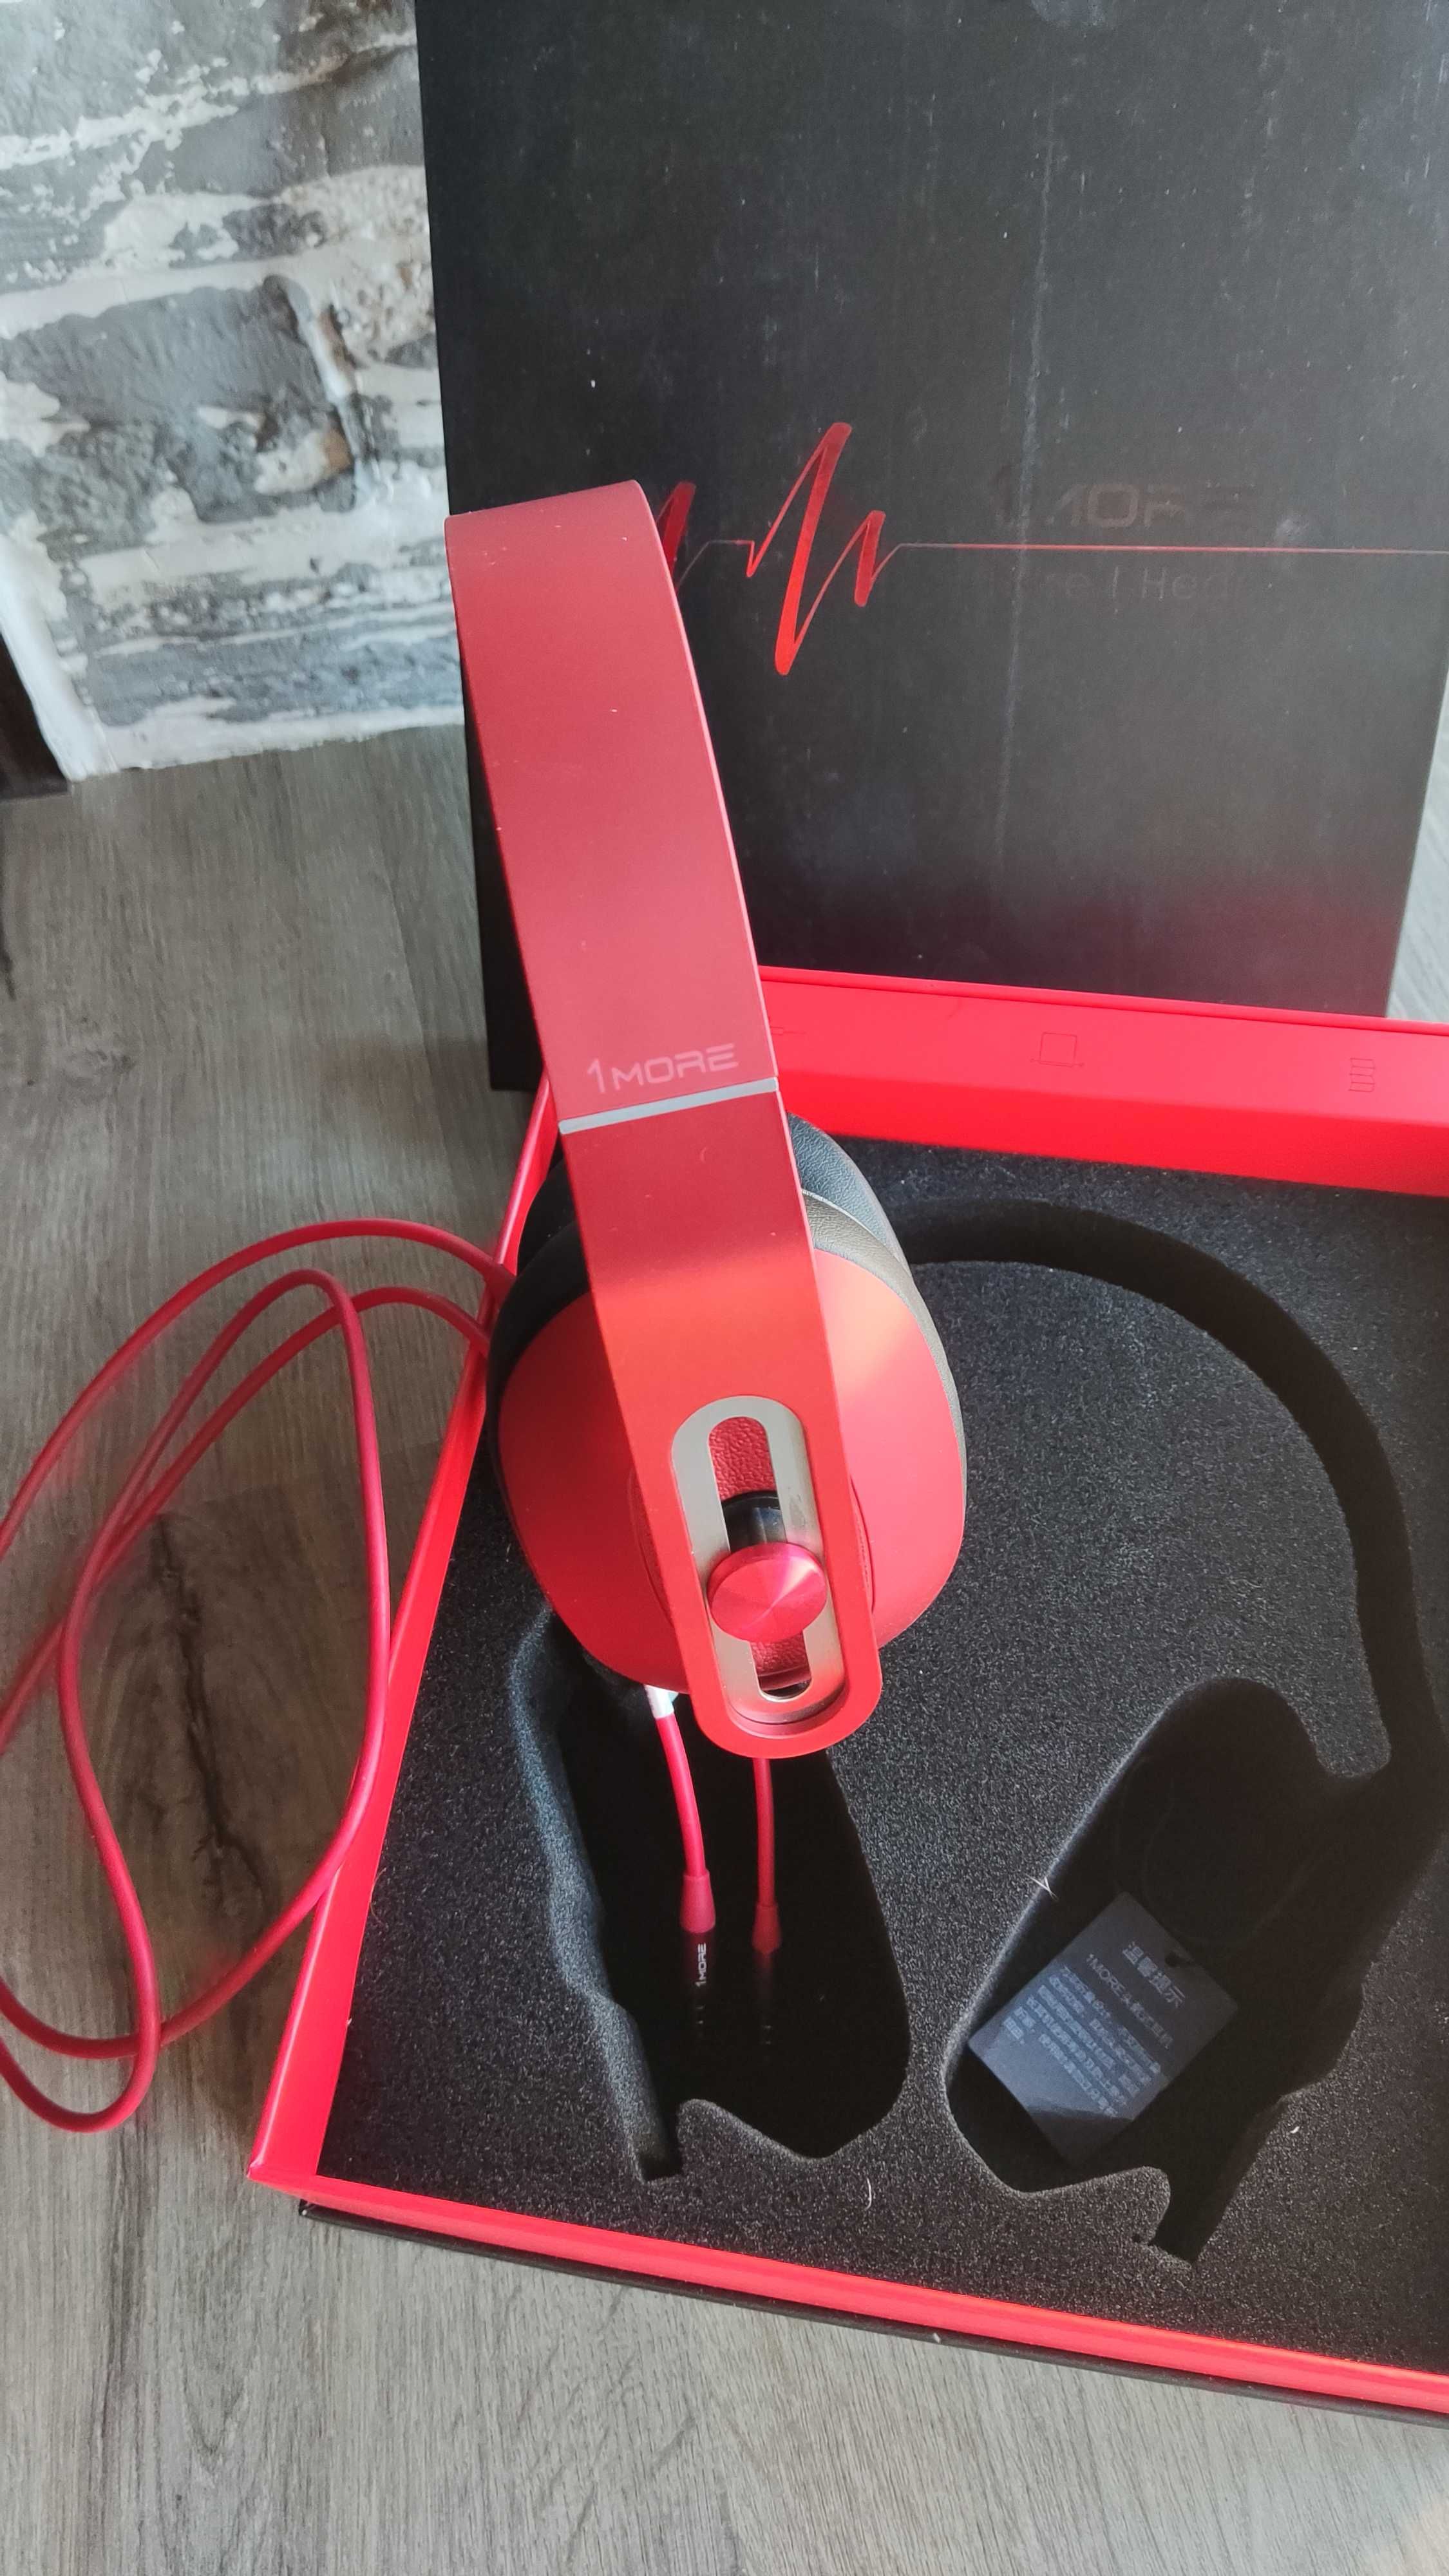 1MORE Over-Ear (MK801) Red